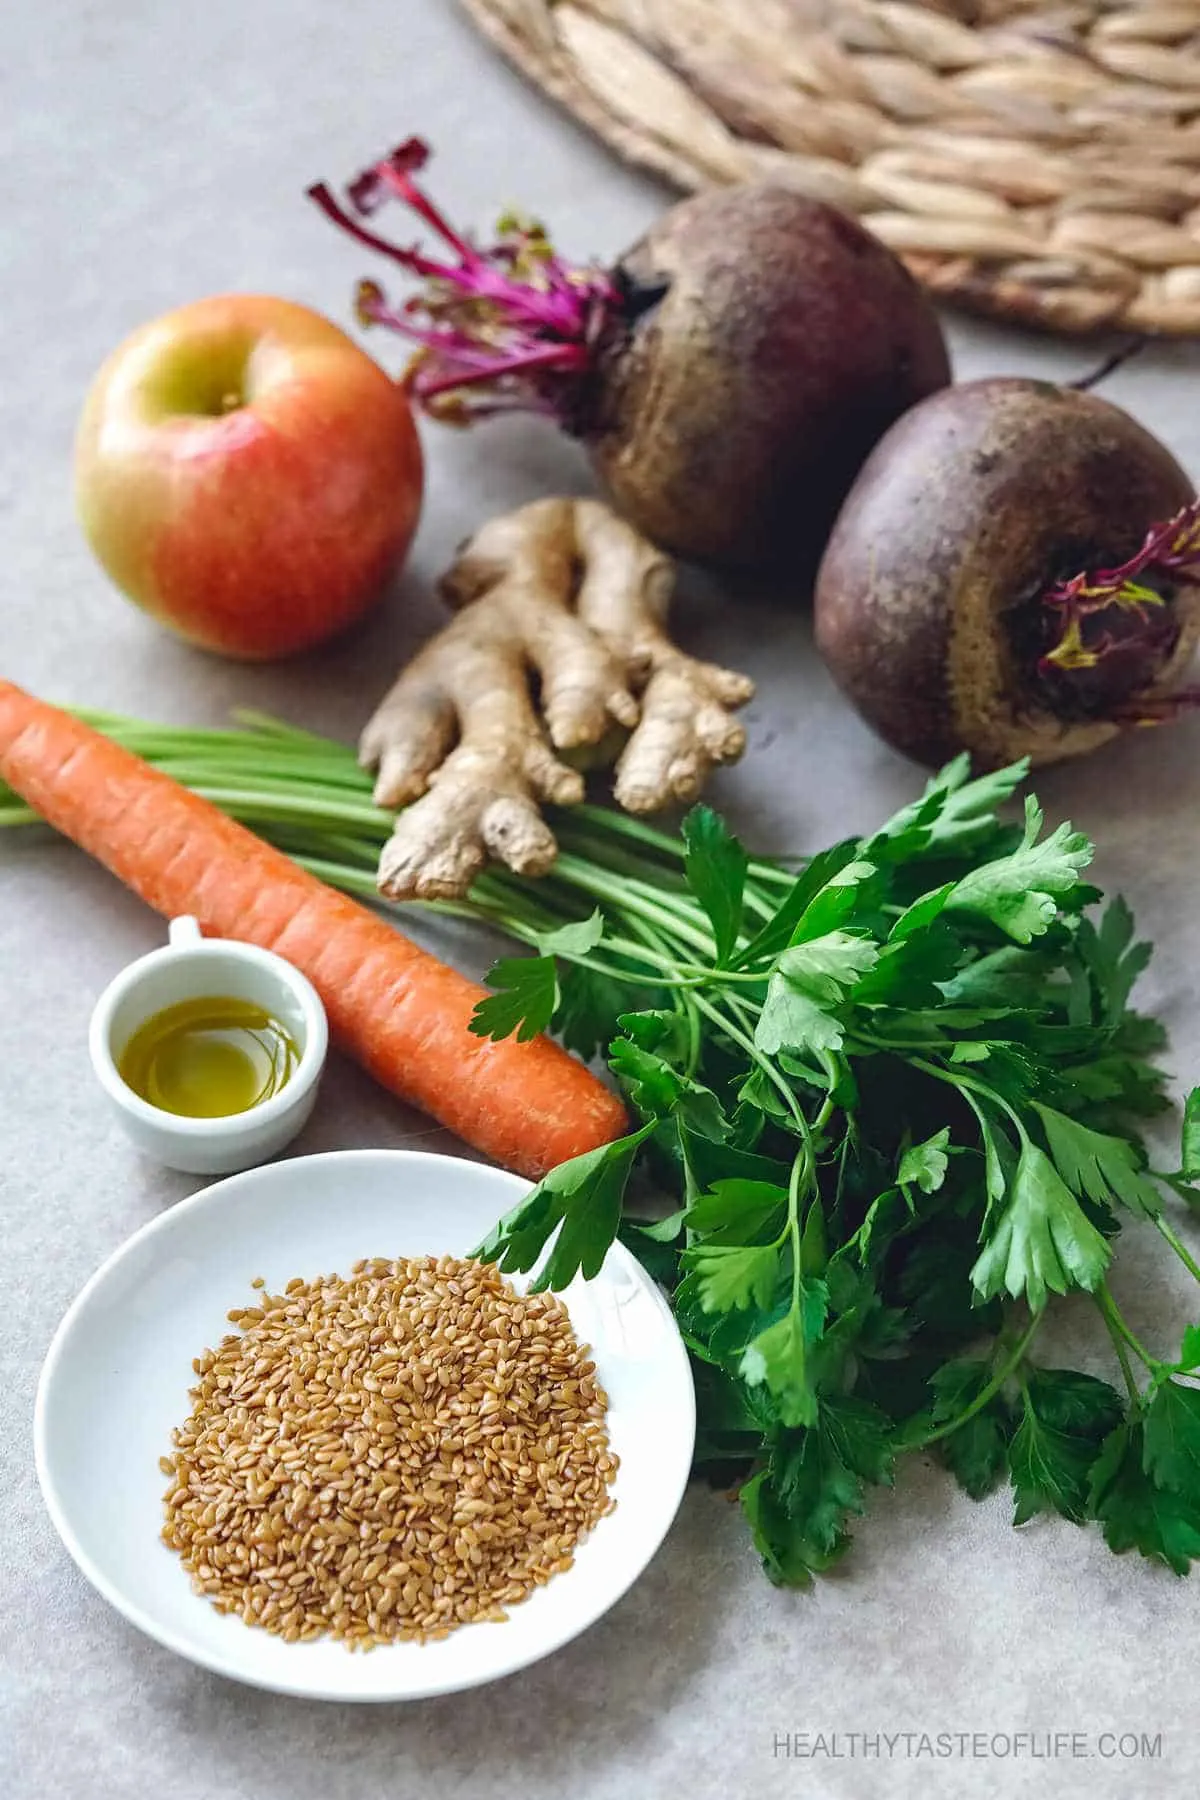 The best ingredients for a liver detox smoothie, cleanse your liver and colon with real whole foods #liverdetox #detoxsmoothie #vegetablesmoothie